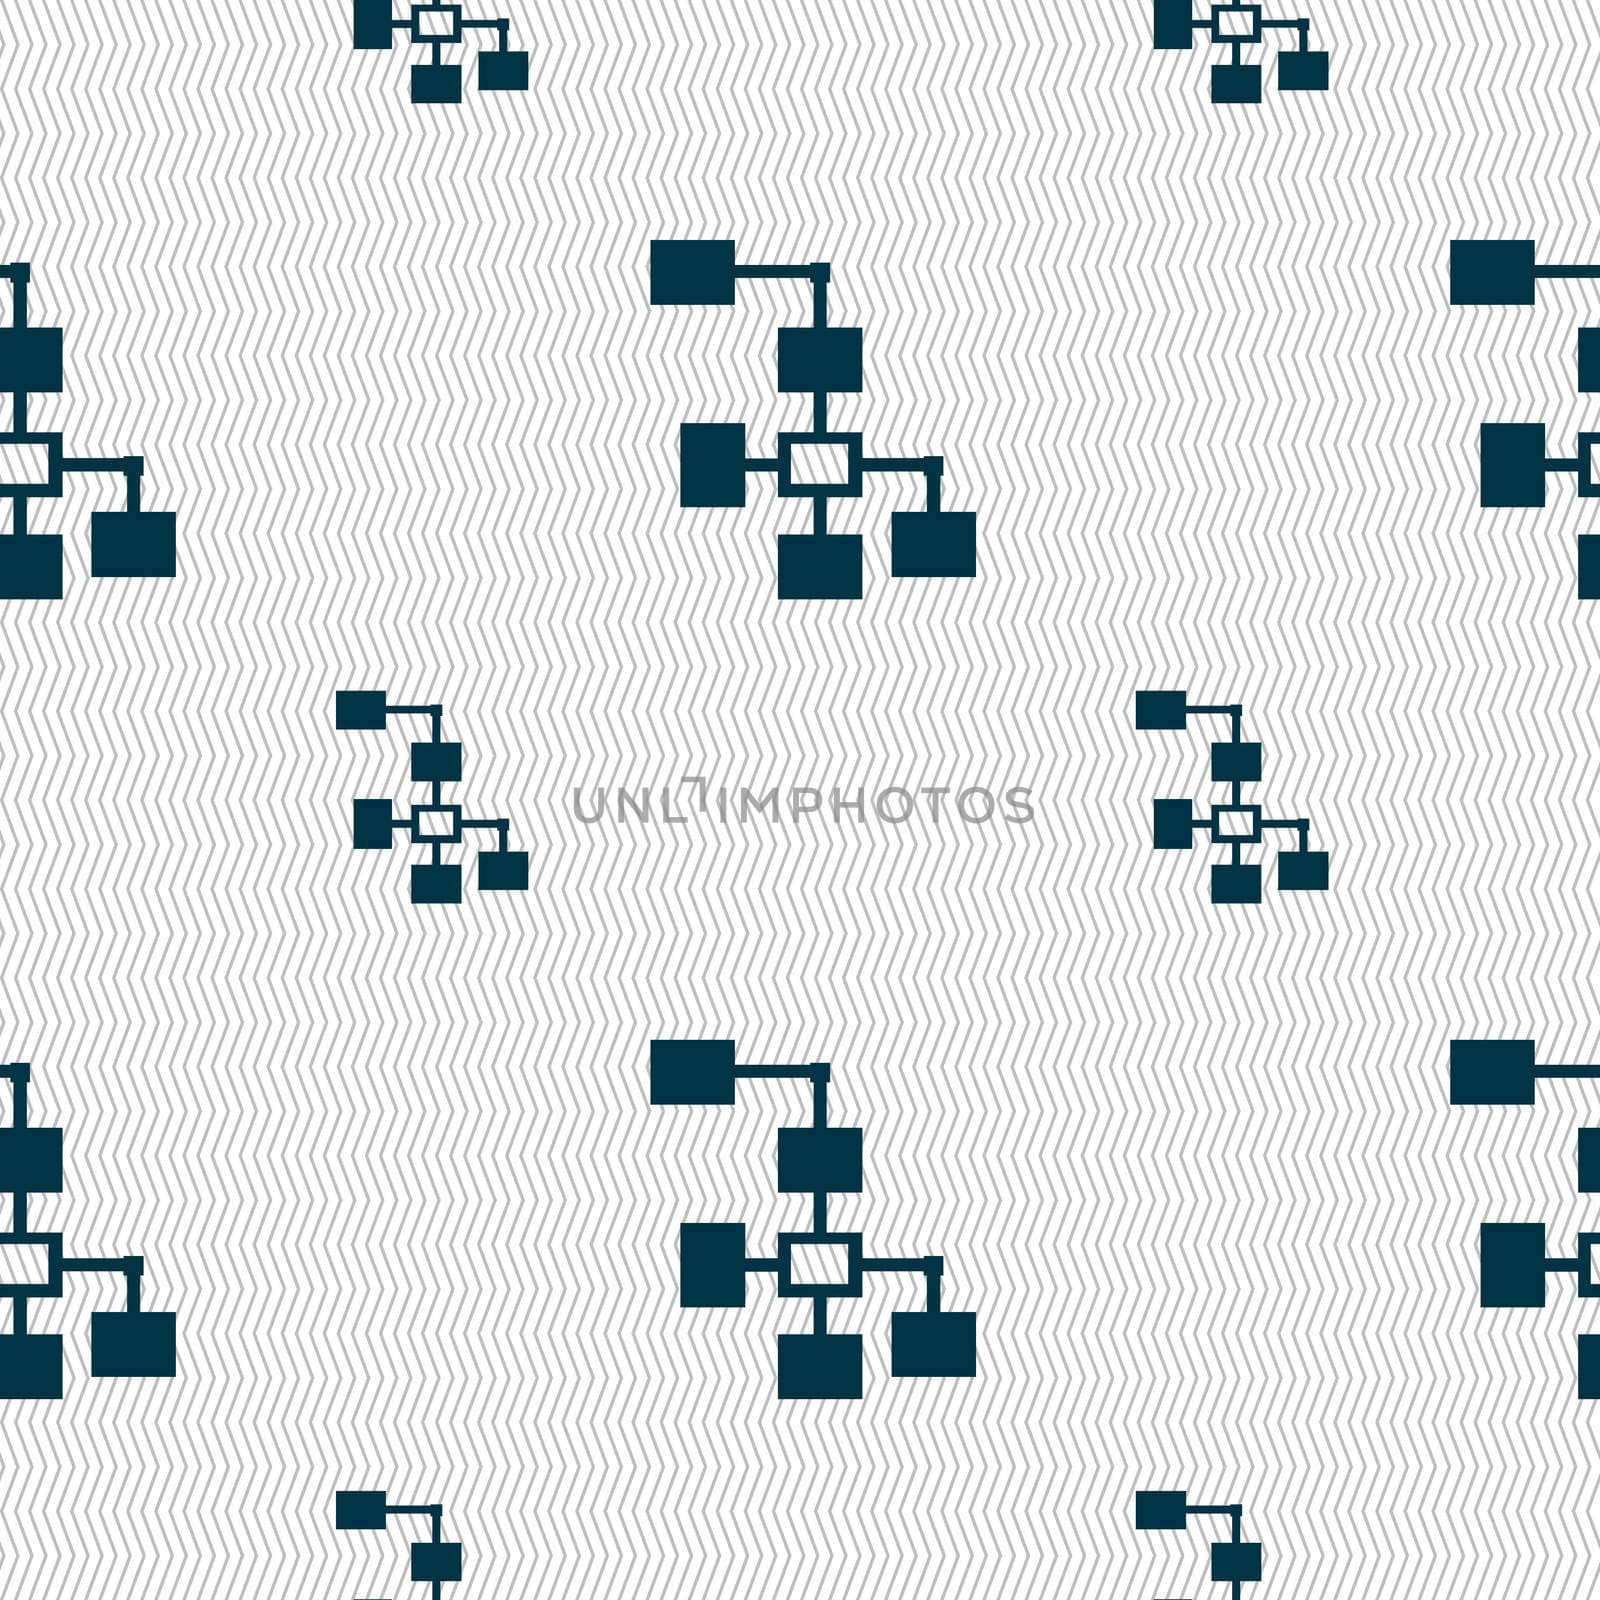 Local Network icon sign. Seamless pattern with geometric texture. illustration